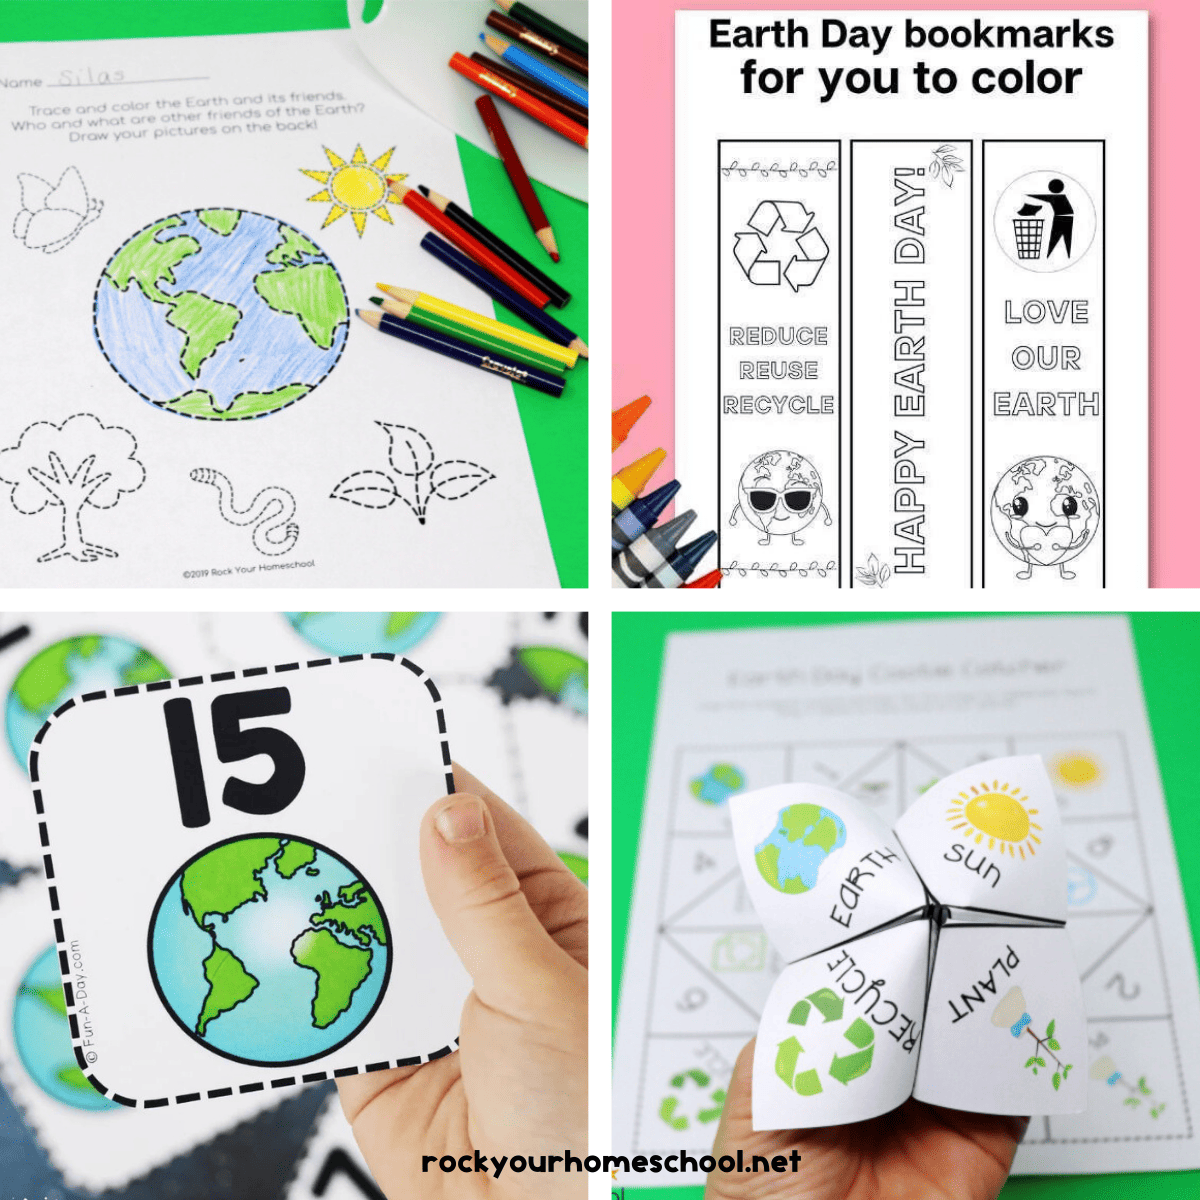 Four examples of free Earth Day printables with tracing pages, coloring bookmarks, number cards, and cootie catcher.